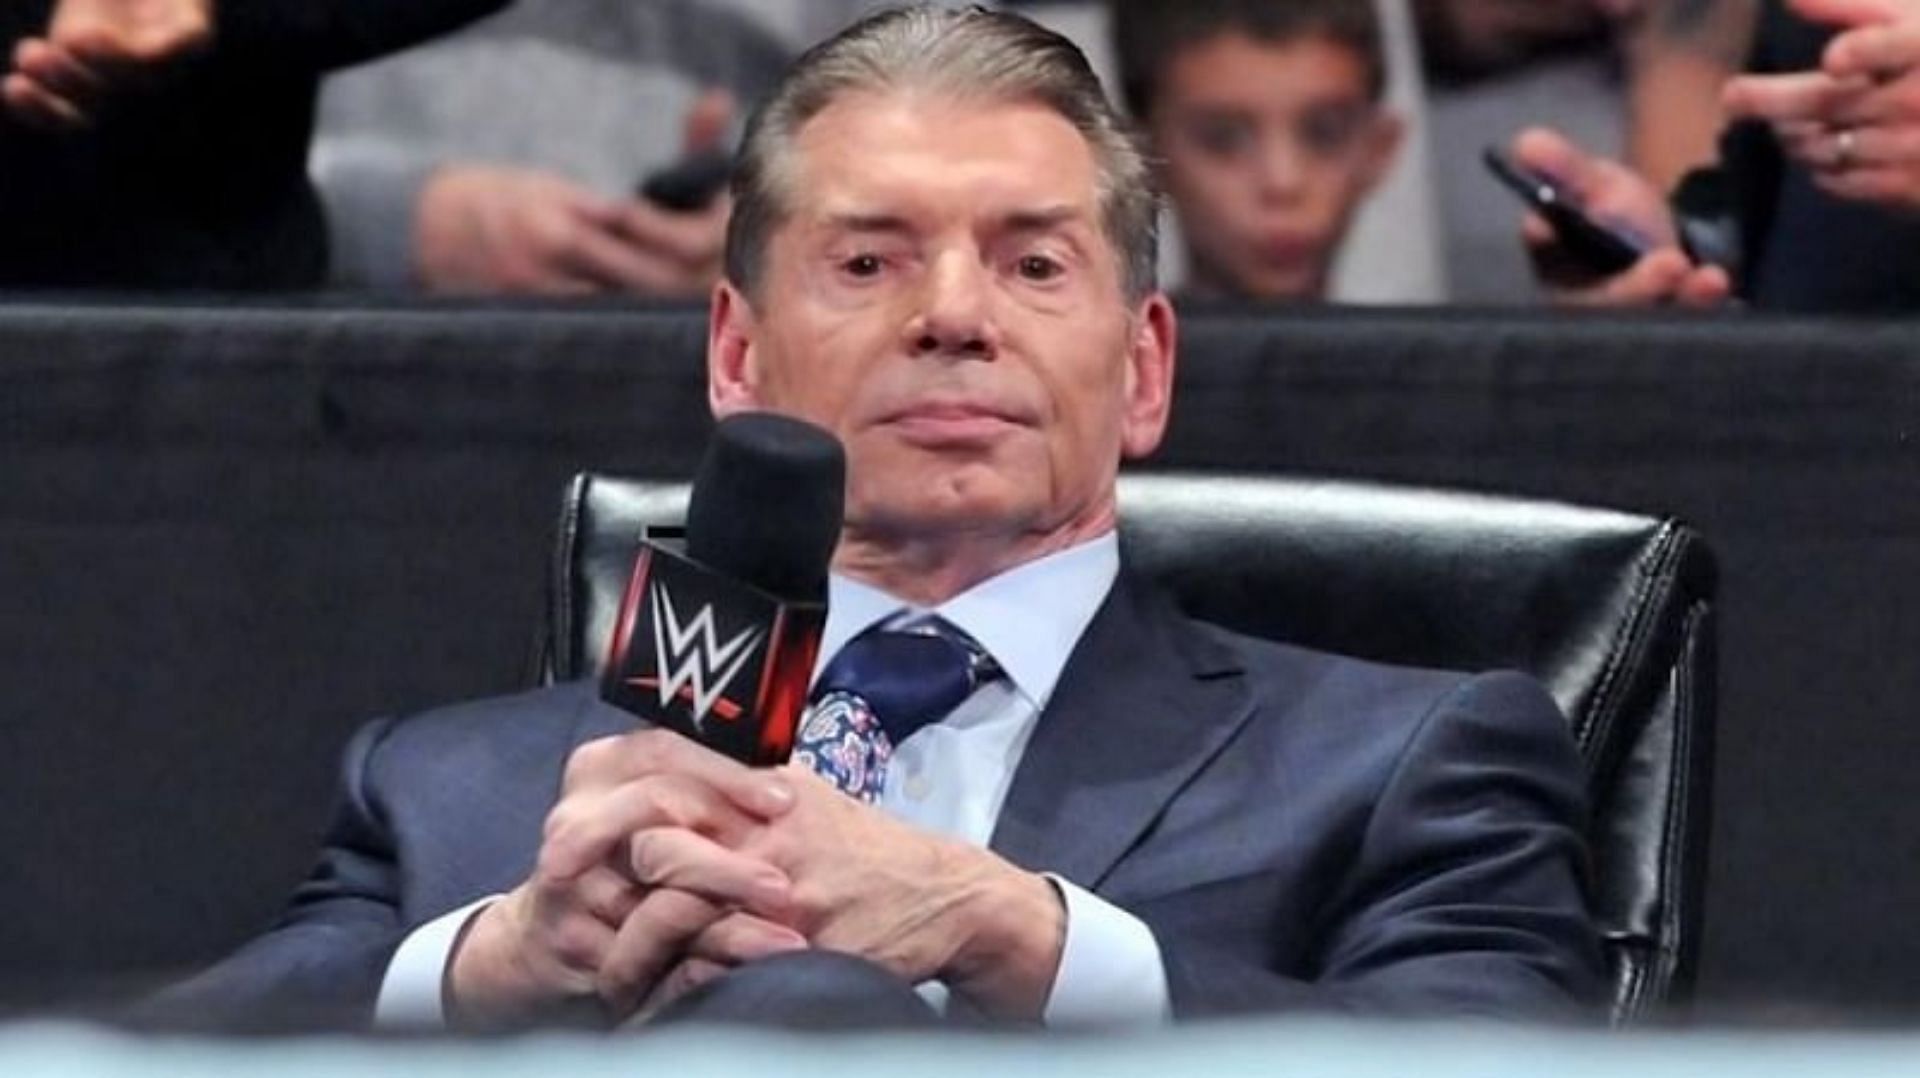 Vince McMahon can be intimidating!